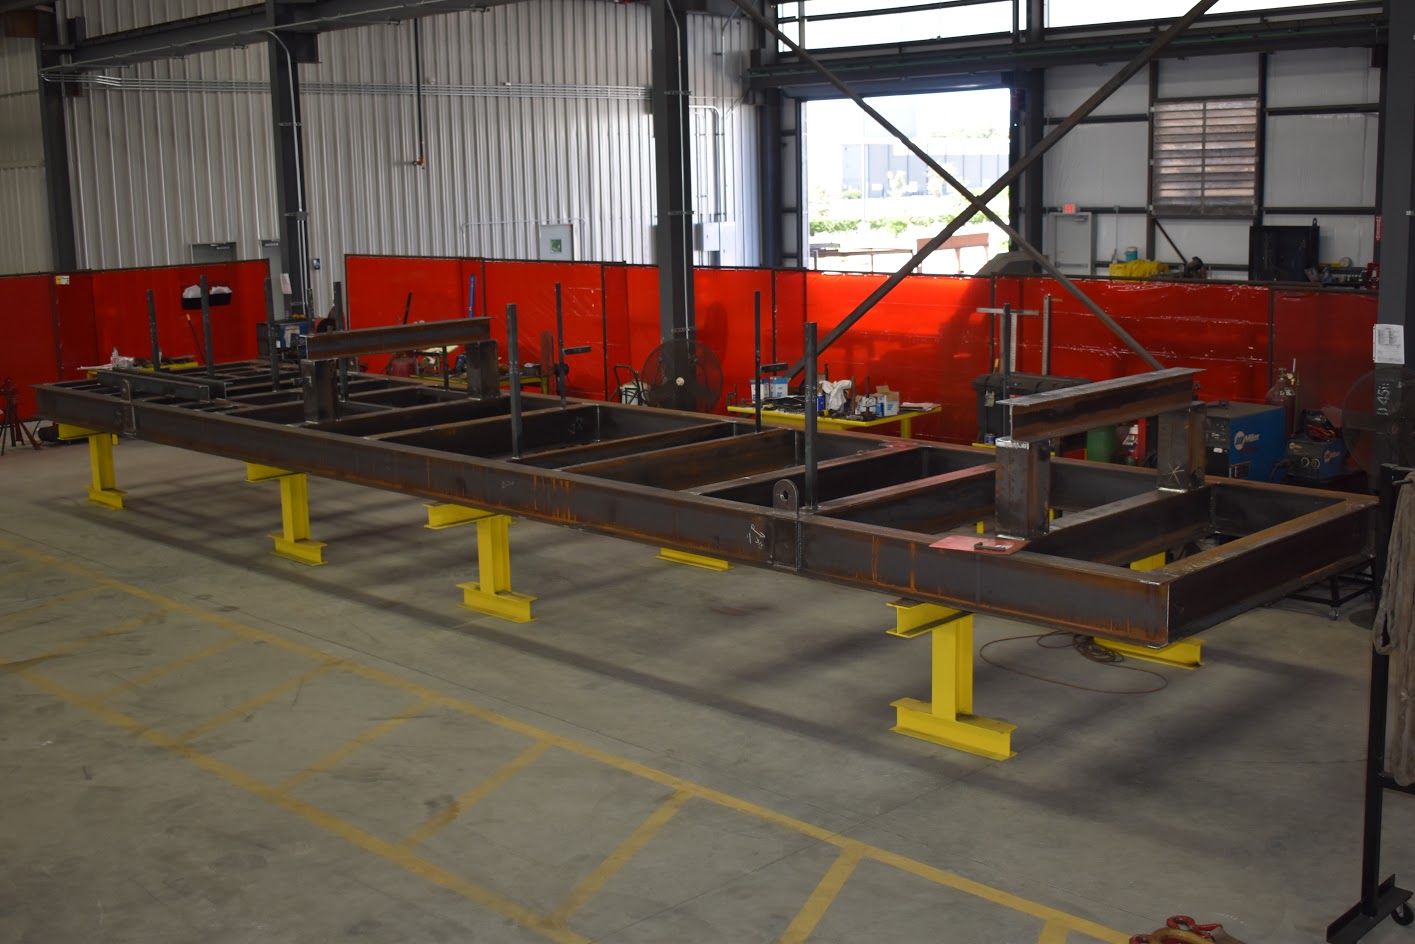 Steel beams being manufactured in the warehouse